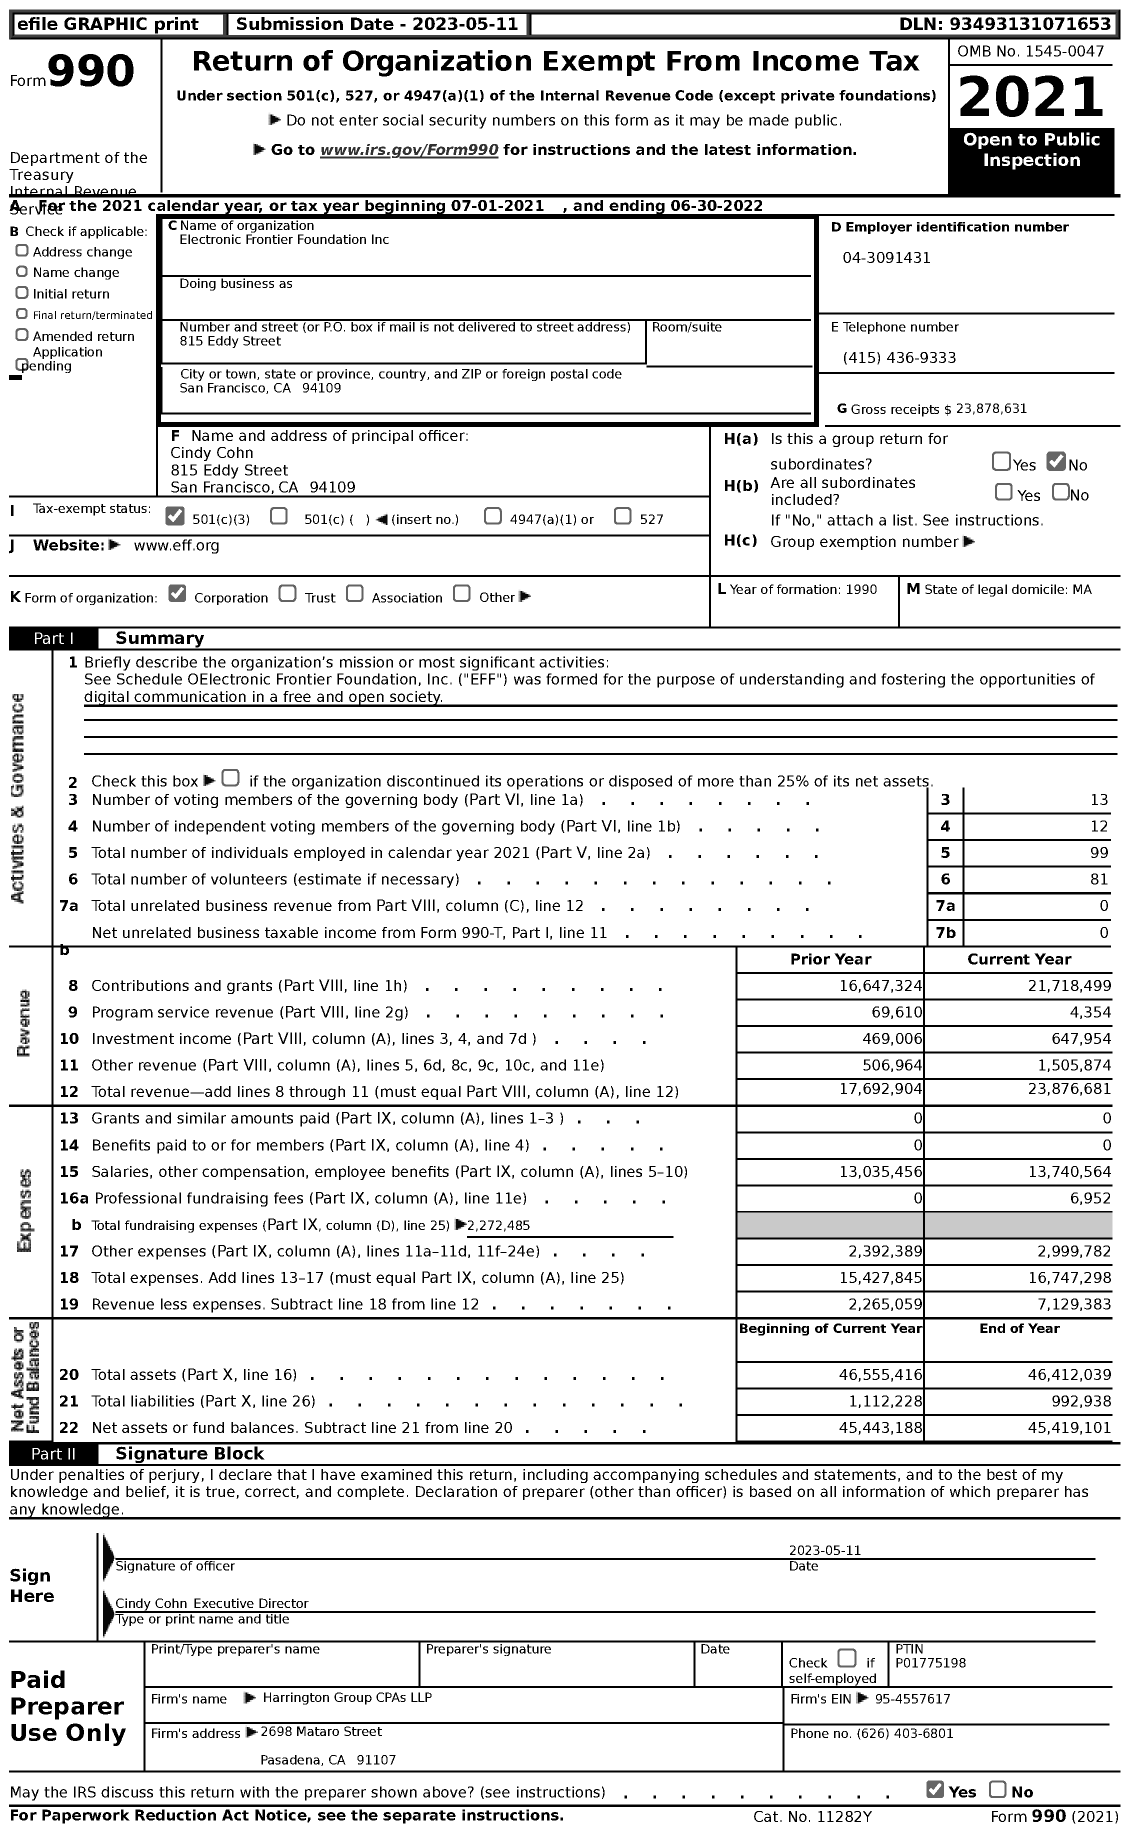 Image of first page of 2021 Form 990 for Electronic Frontier Foundation (EFF)